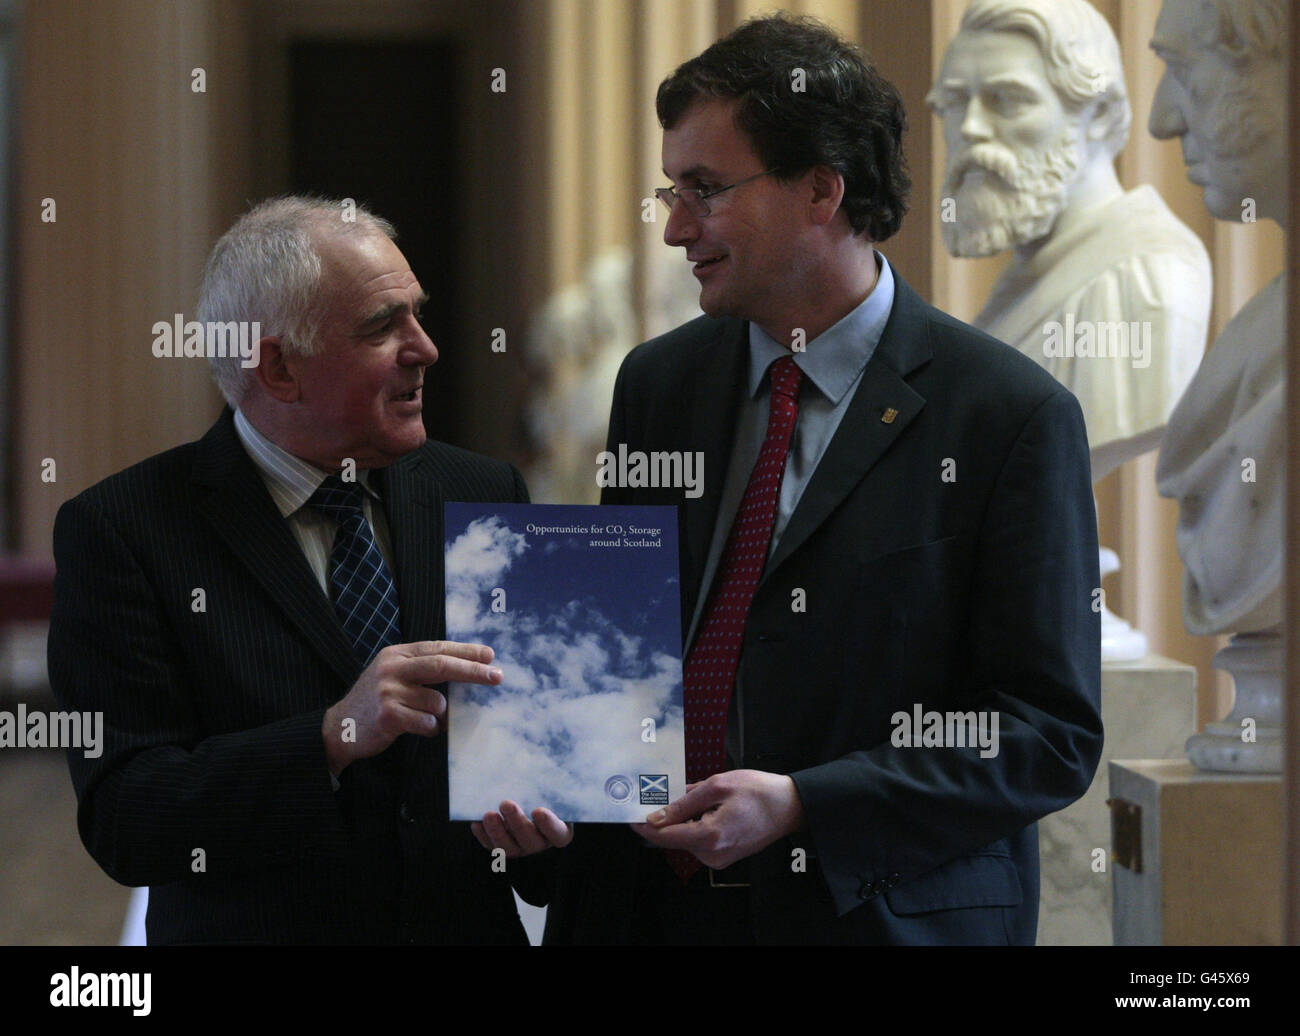 Scottish Energy Minister Jim Mather talks to Professor Eric Mackay (right) one of the contributors to the report on Scotland's potential for the North Sea carbon storage industry at the Playfair Library, Edinburgh, for it's launch. Stock Photo